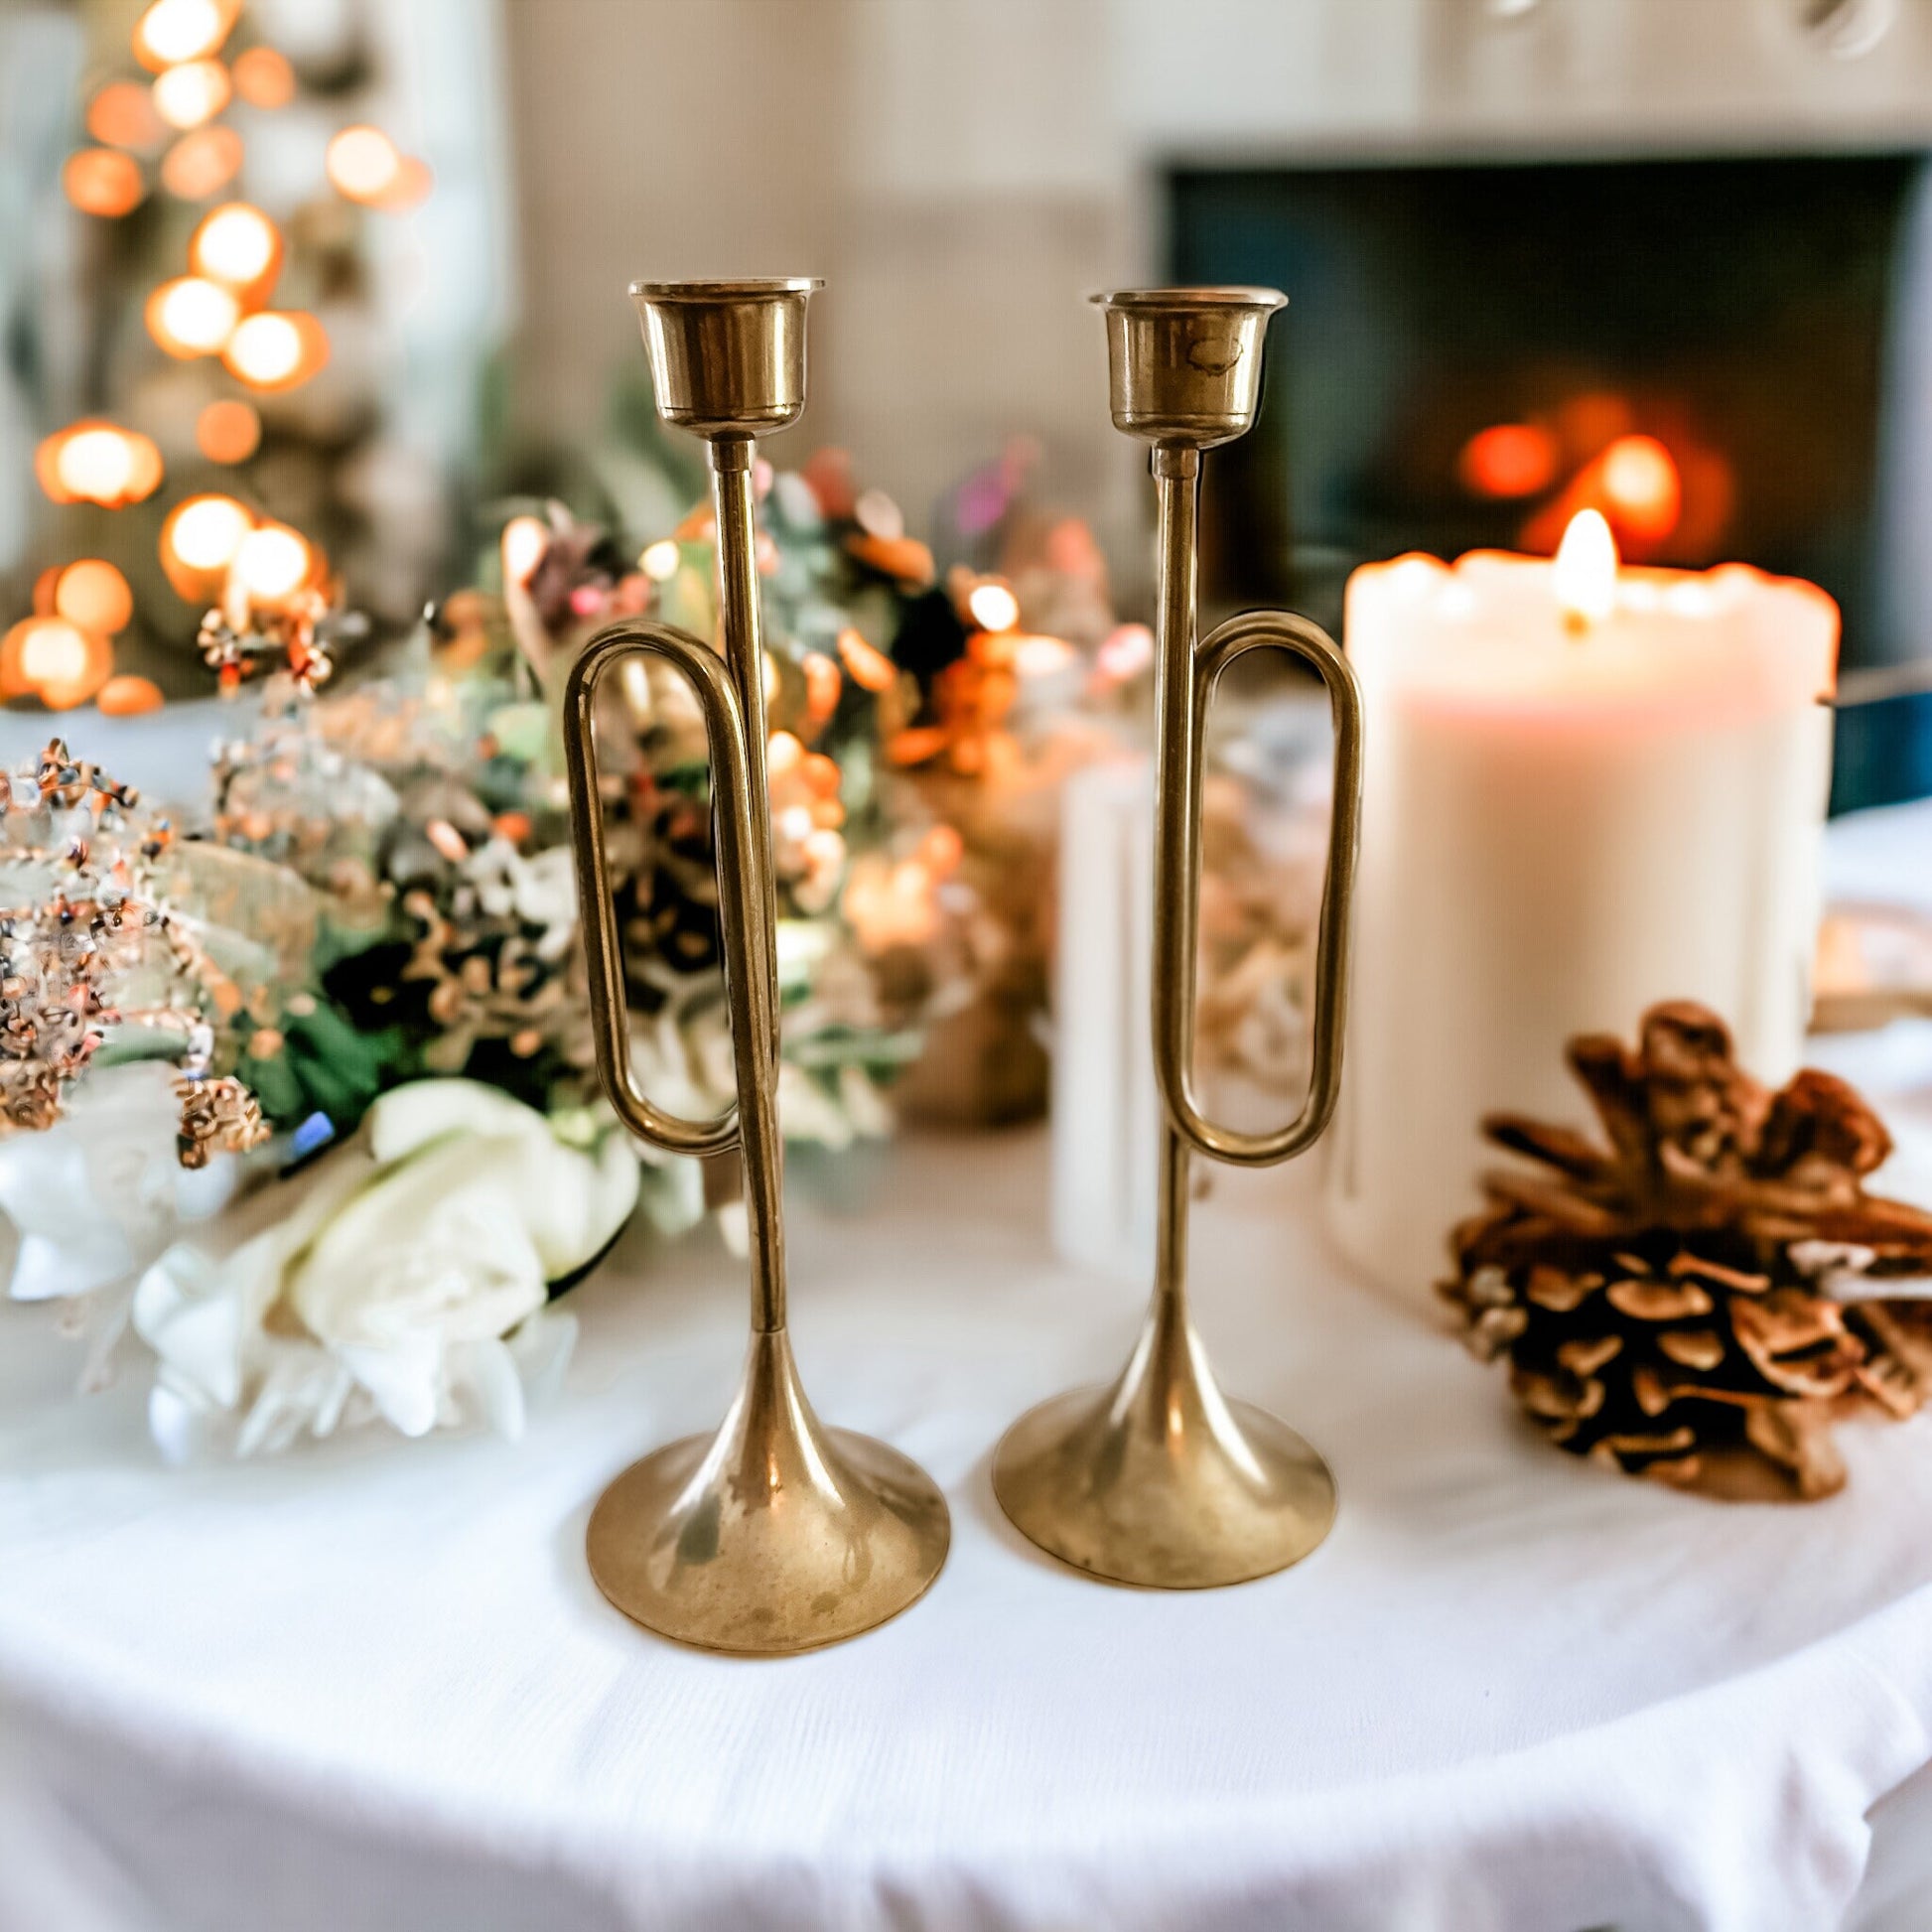 Vintage Brass Trumpet-Shaped Candle Holders | Mid-Century Decor